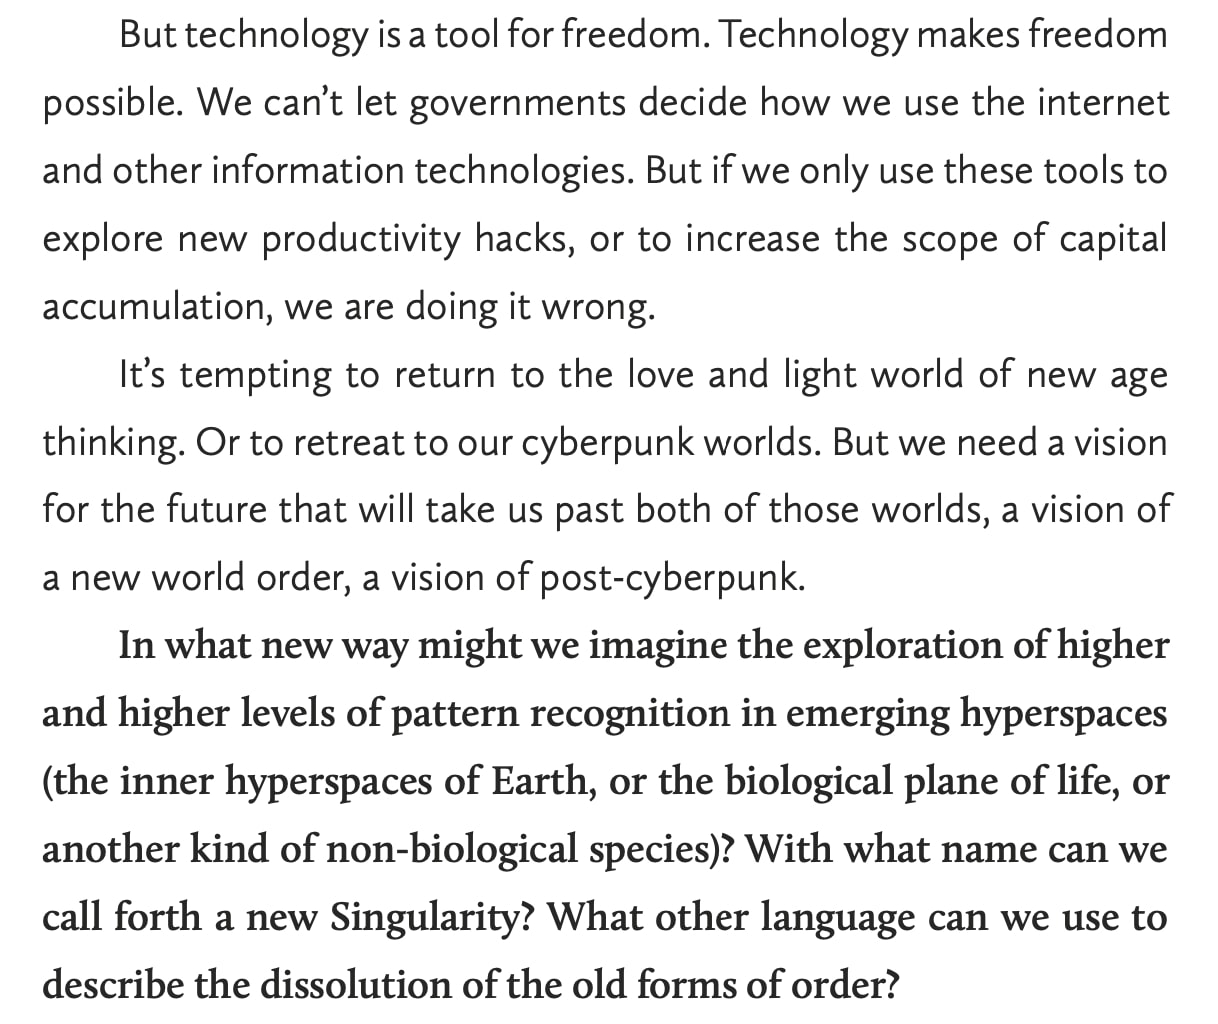 “But technology is a tool for freedom. Technology makes freedom possible. We can’t let governments decide how we use the internet and other information technologies. But if we only use these tools to explore new productivity hacks, or to increase the scope of capital accumulation, we are doing it wrong. 
It’s tempting to return to the love and light world of new age thinking. Or to retreat to our cyberpunk worlds. But we need a vision for the future that will take us past both of those worlds, a vision of a new world order, a vision of post-cyberpunk. 
In what new way might we imagine the exploration of higher and higher levels of pattern recognition in emerging hyperspaces (the inner hyperspaces of Earth, or the biological plane of life, or another kind of non-biological species)? With what name can we call forth a new Singularity? What other language can we use to describe the dissolution of the old forms of order?”